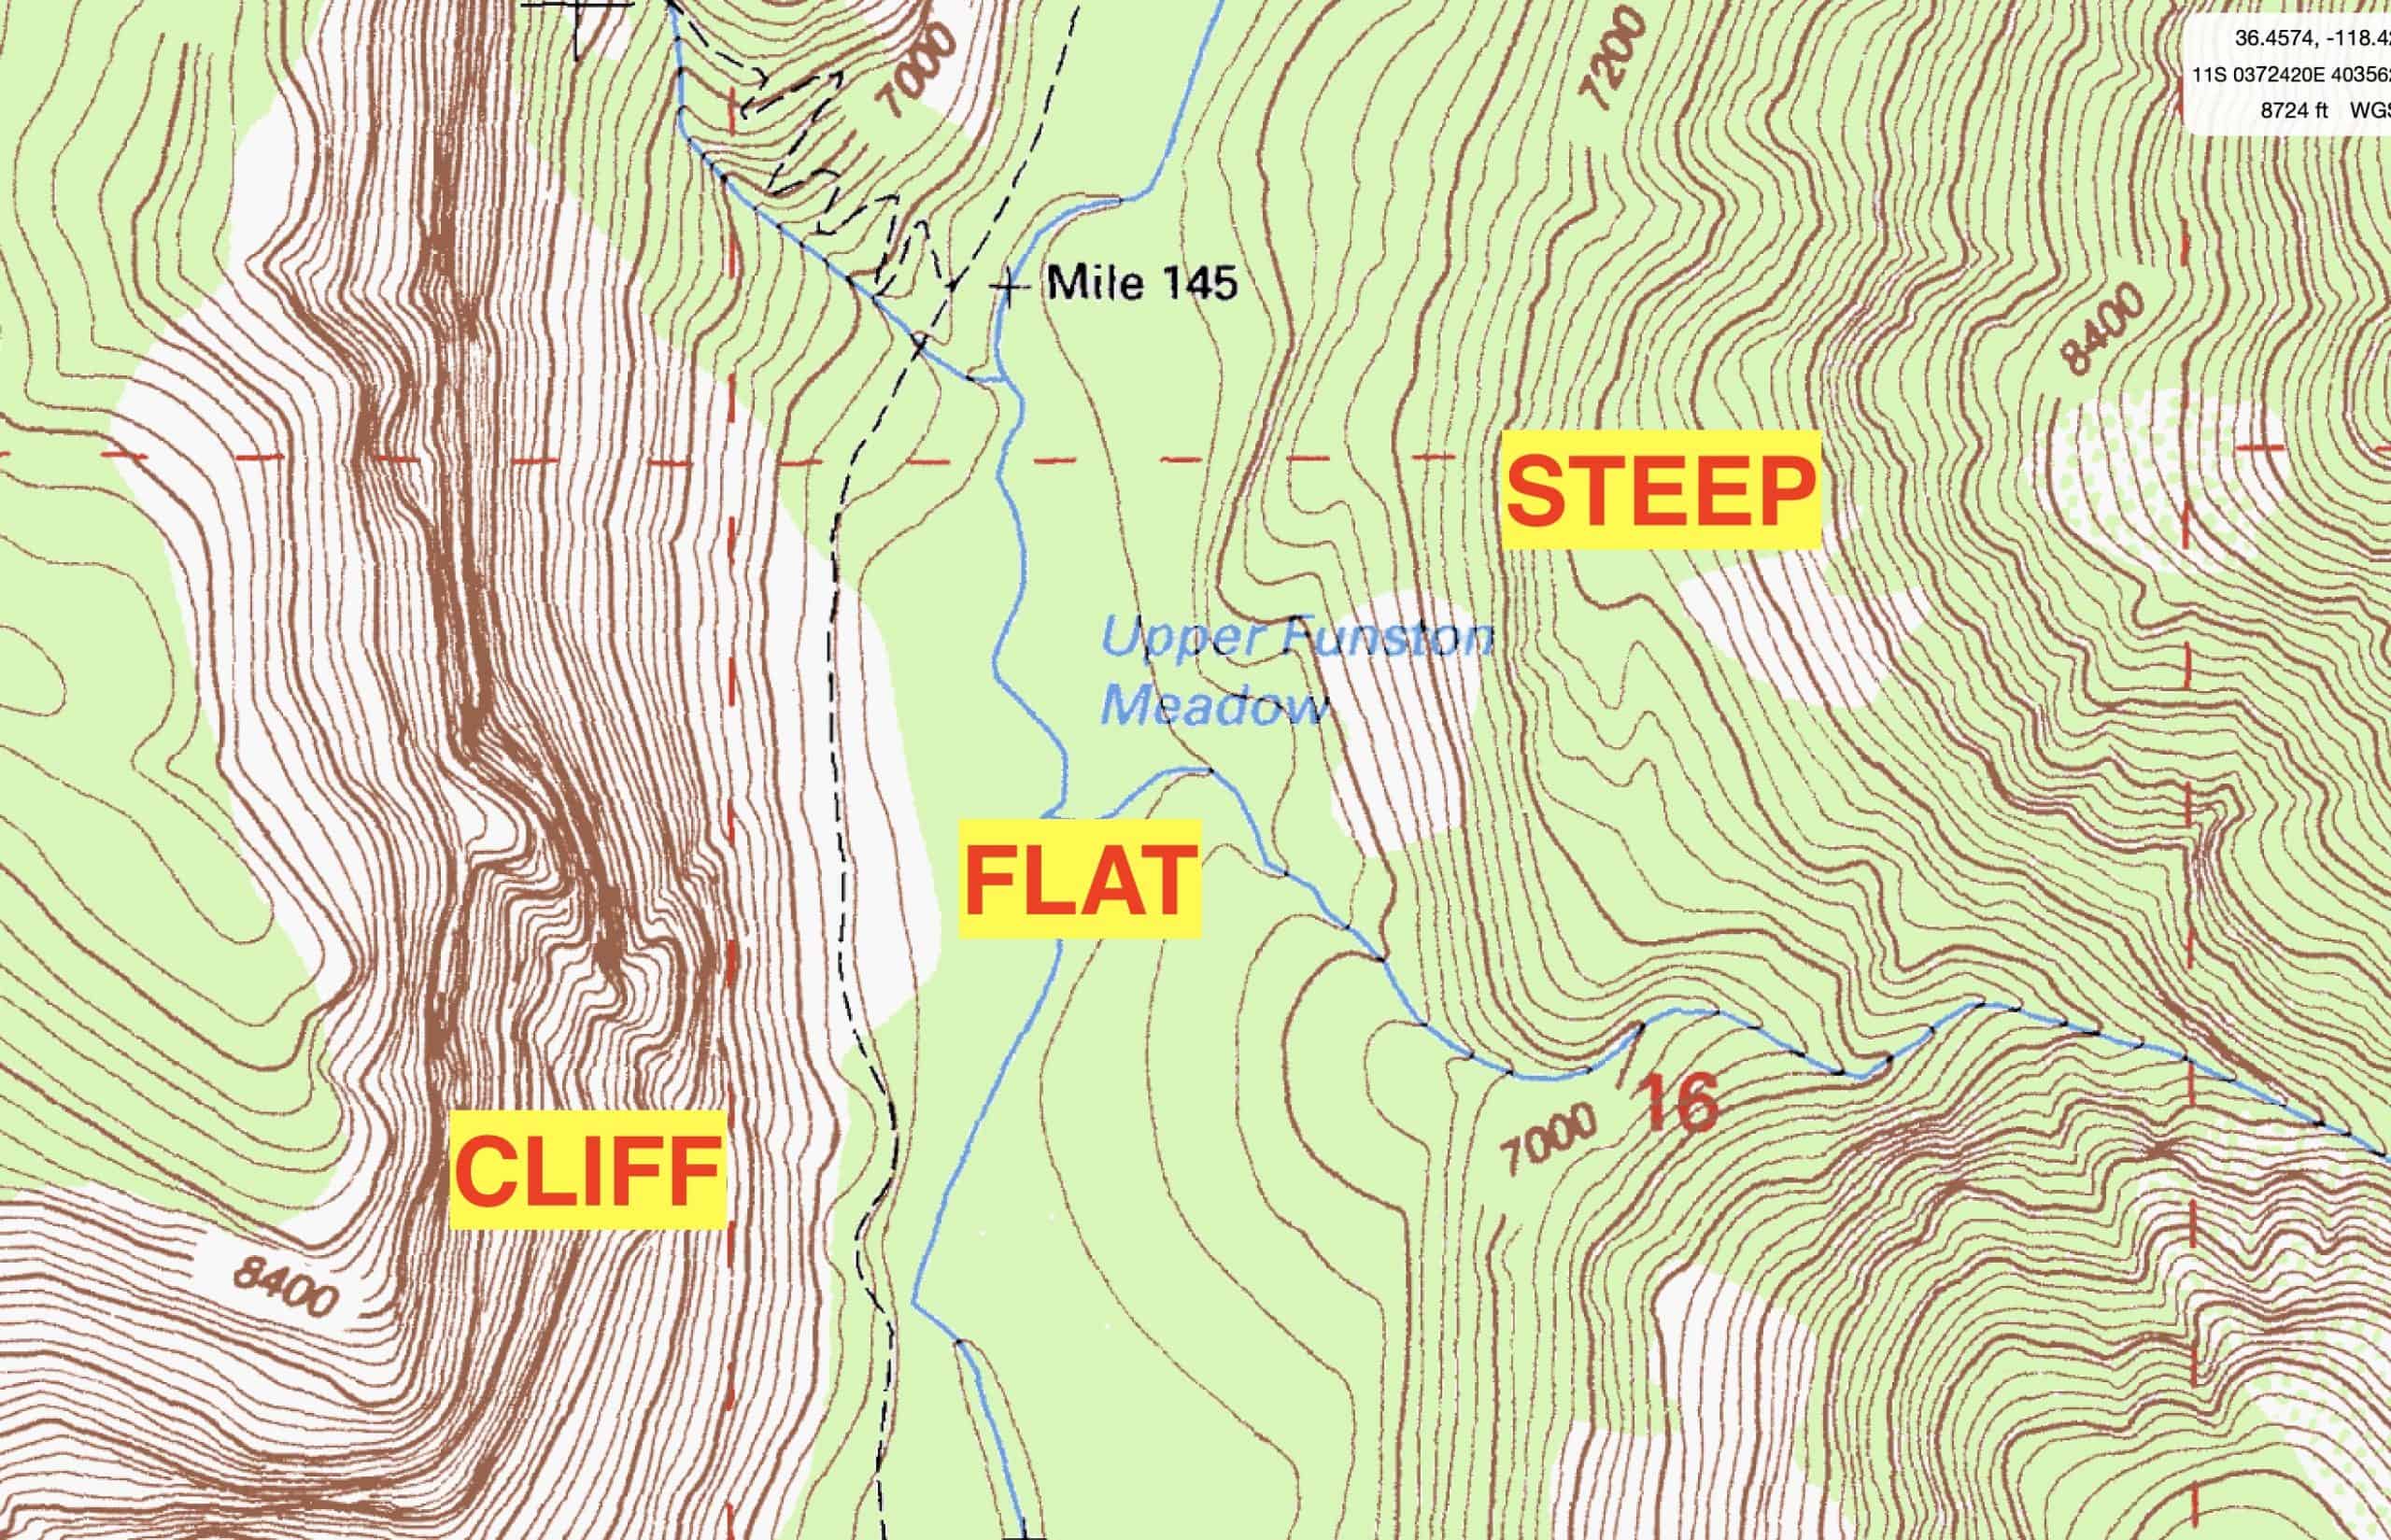 Let’s start with the basics, a flat area, a steep slope, and a cliff.